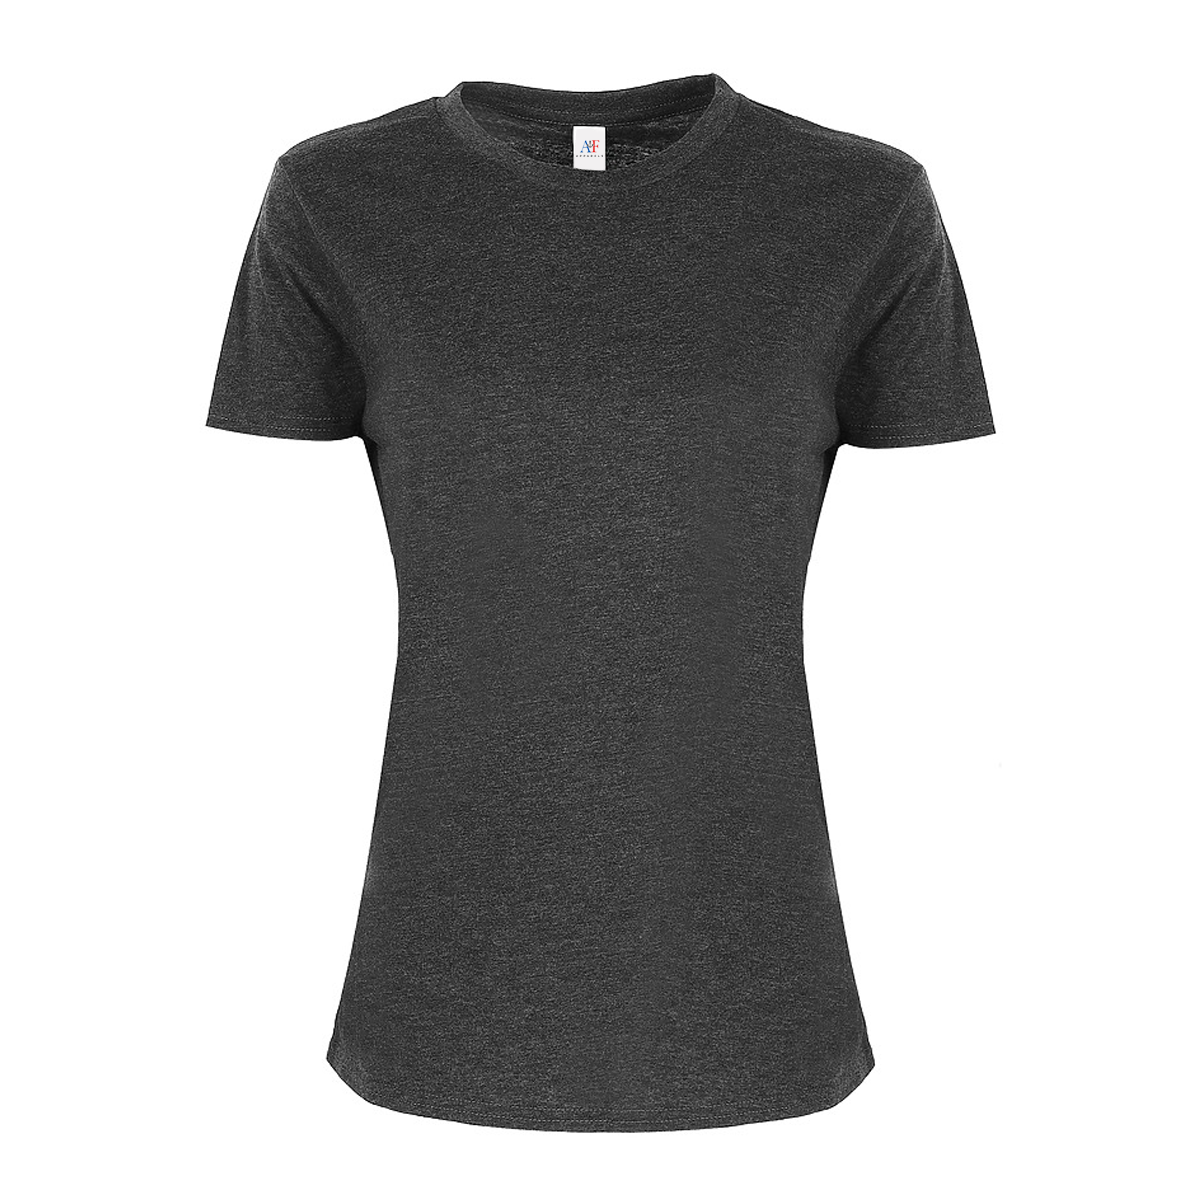 1005 Women's Fit Tee 4.3 Oz - Charcoal Heather Color